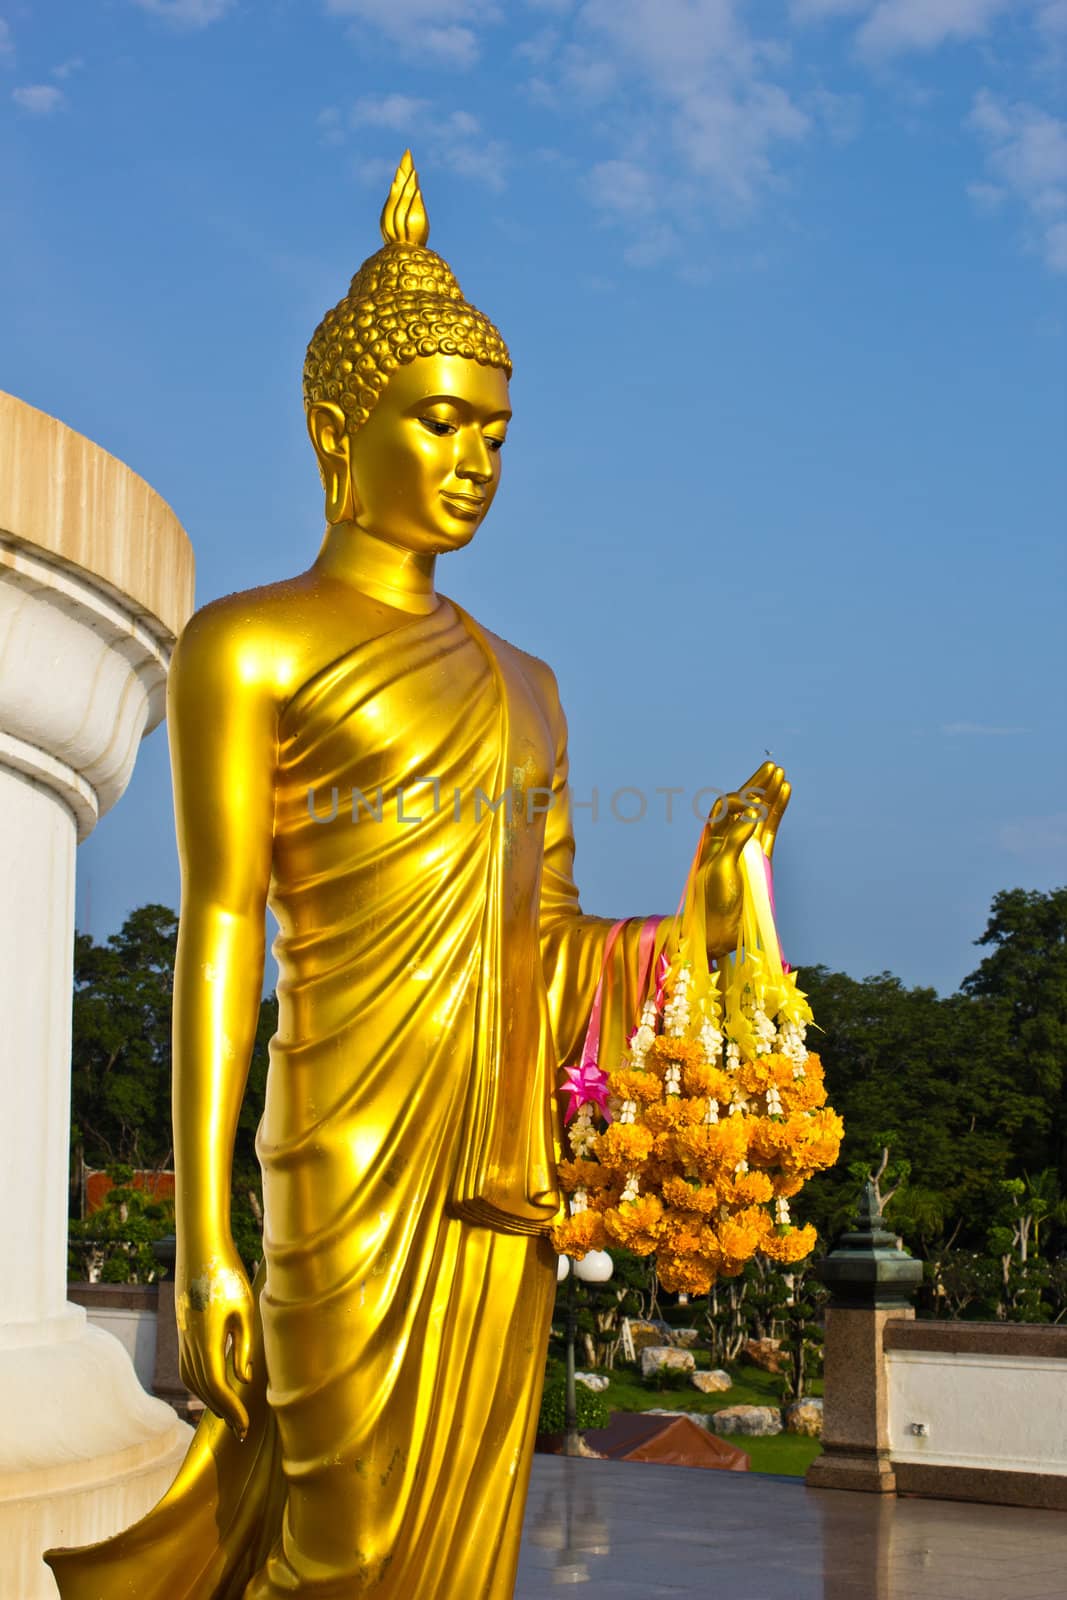 Middle buddha in front of Principle buddha in Buddhamonthon, Thailand.